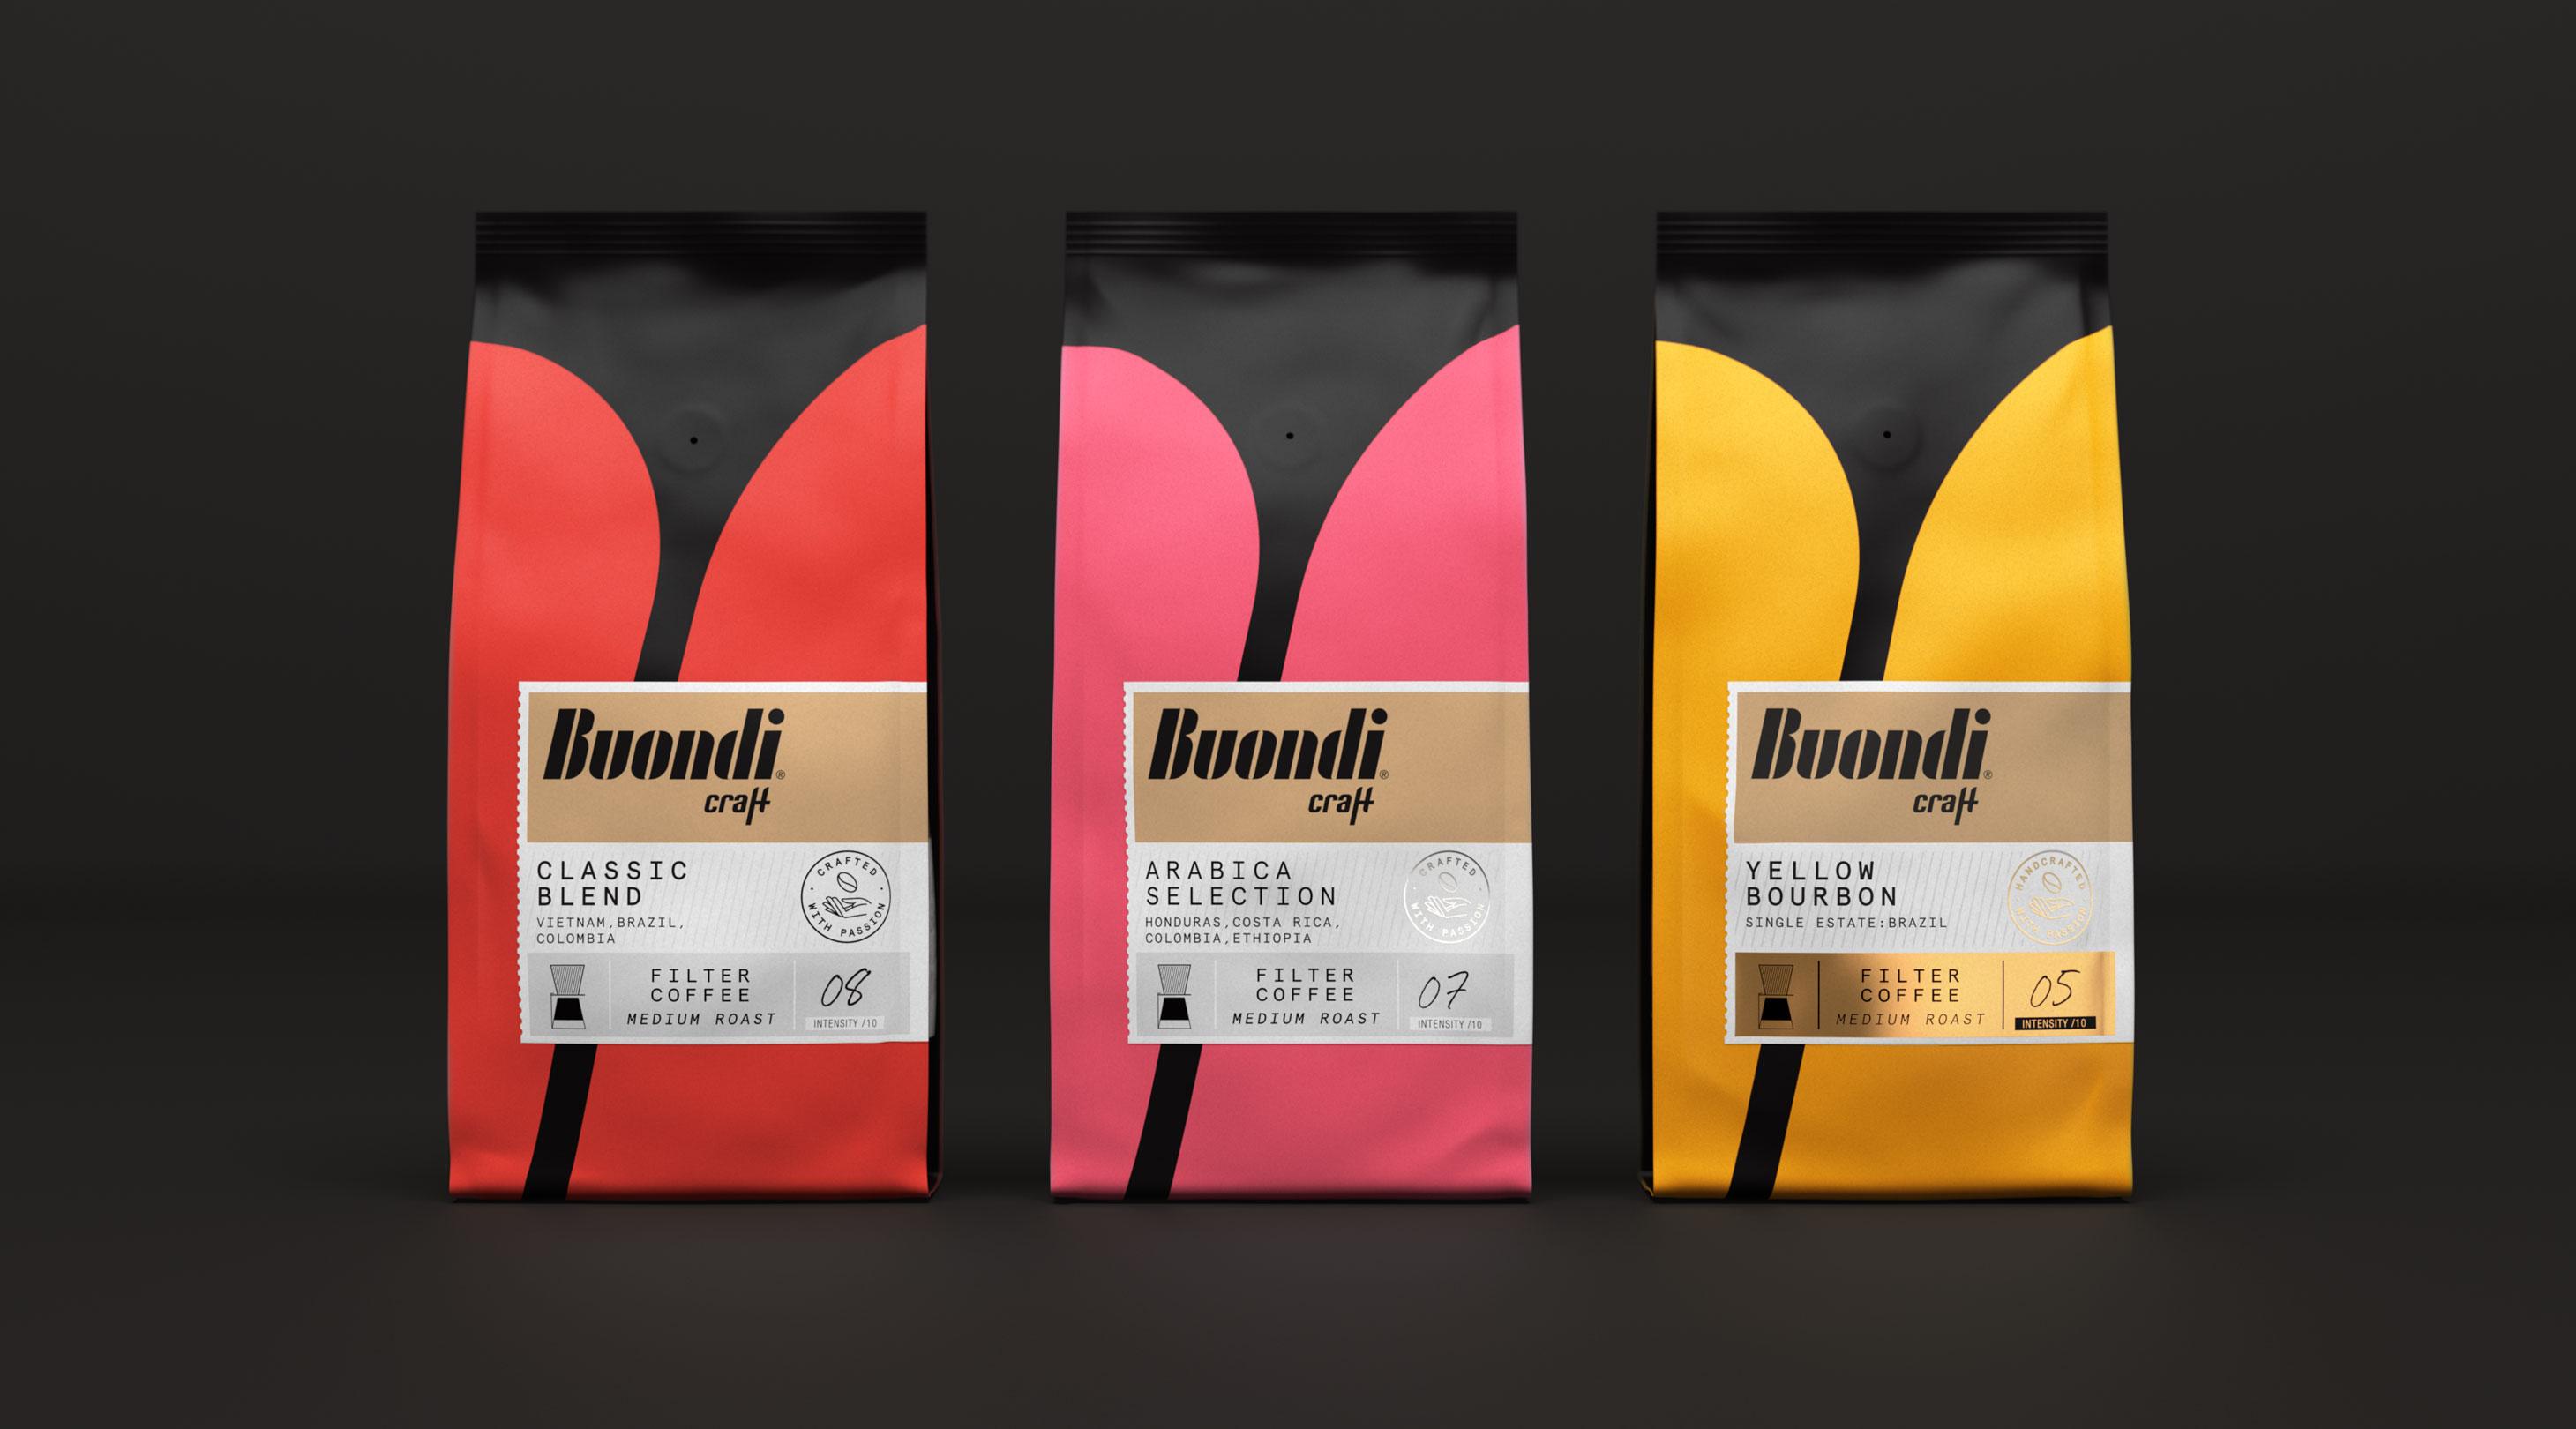 Buondi Craft Filter Coffee Packaging